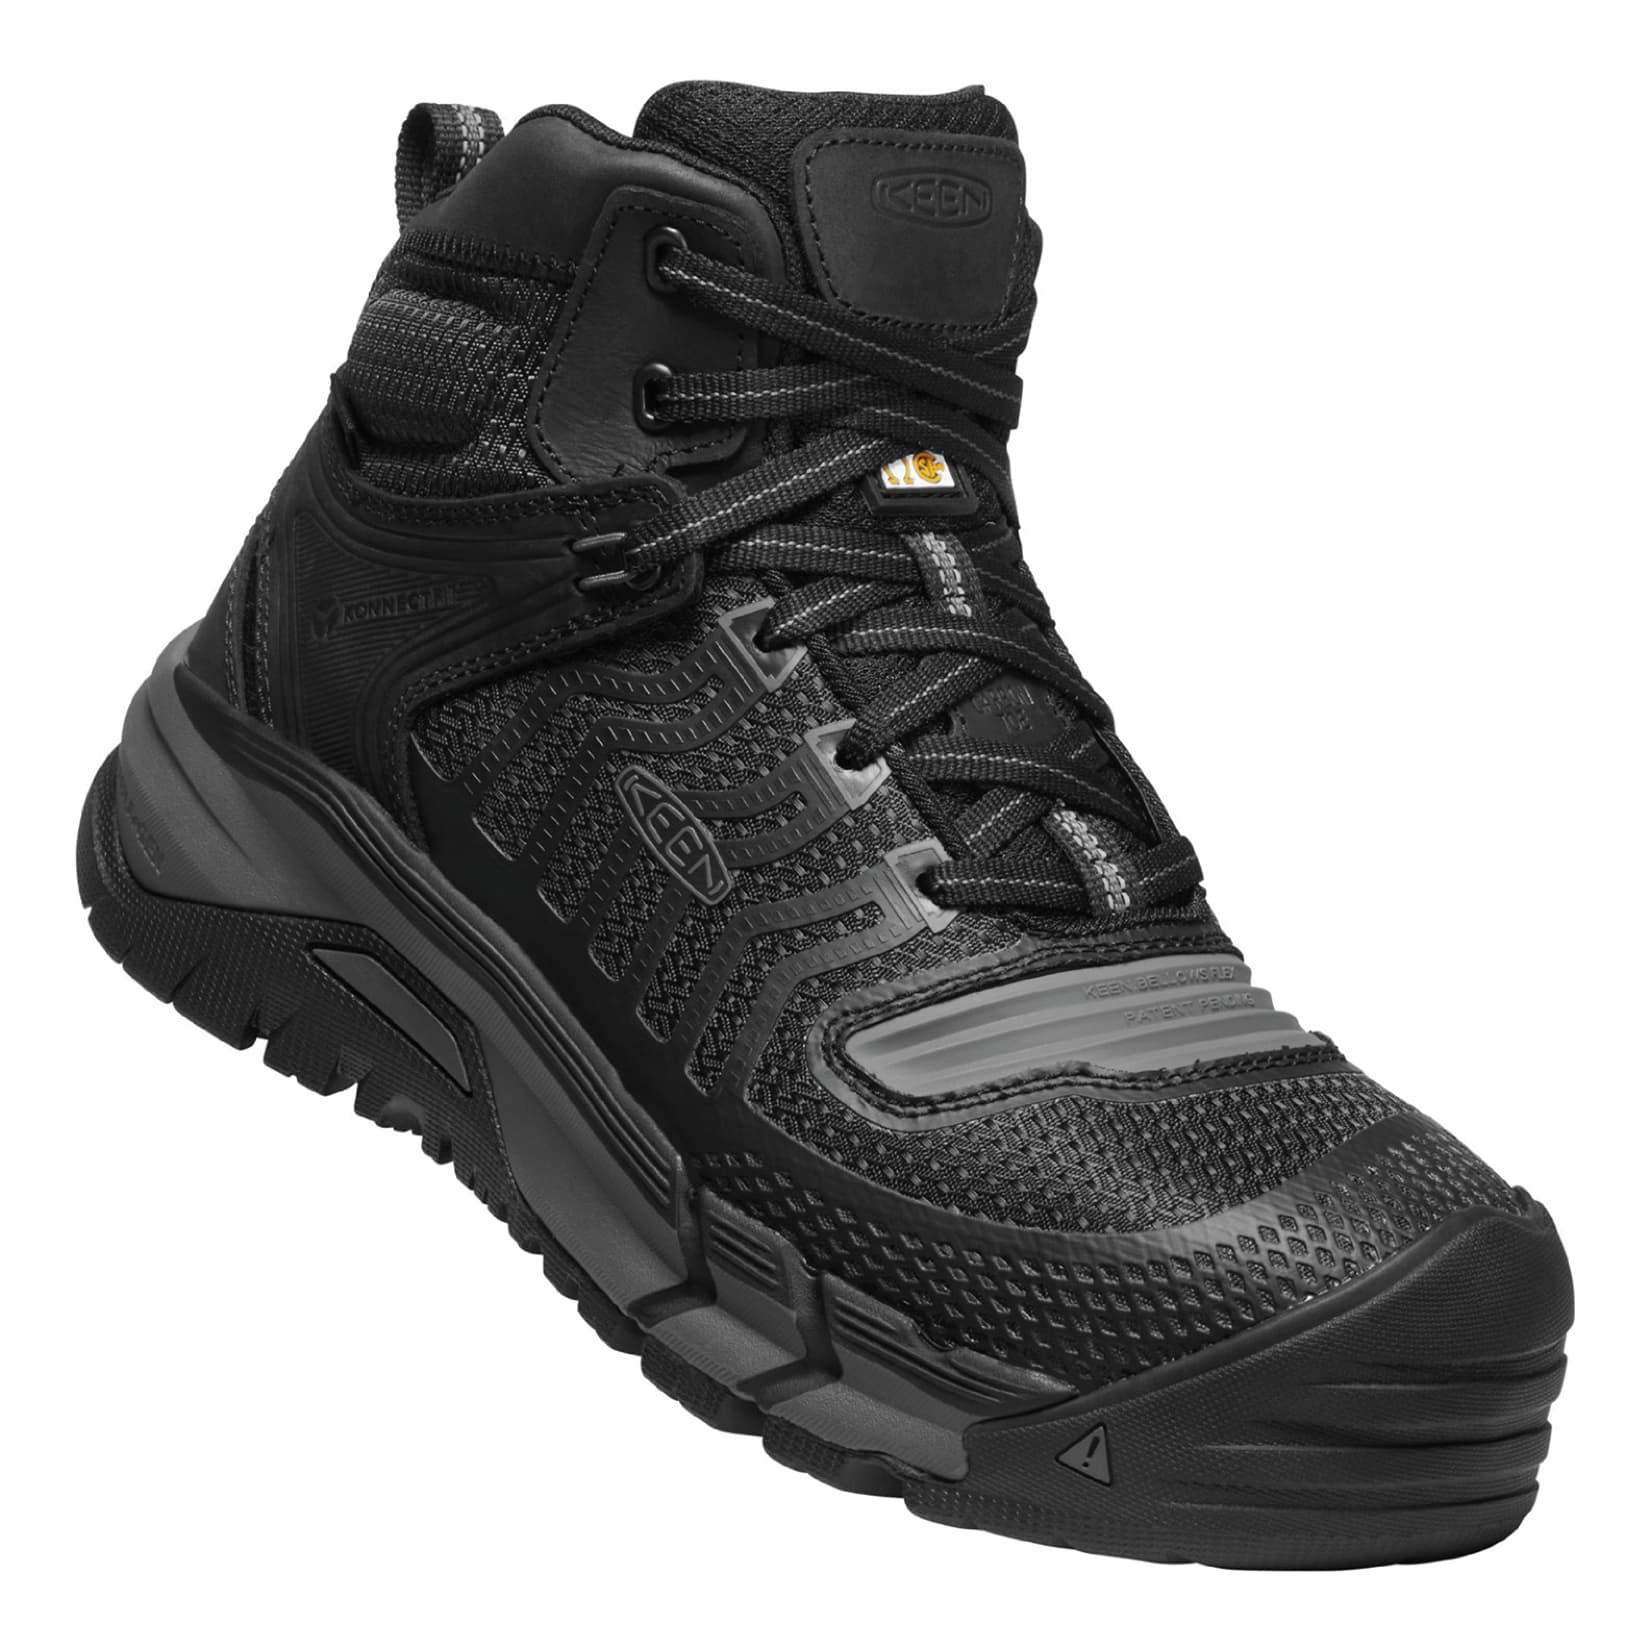 Under Armour Stellar G2 Protect Composite Toe Boots